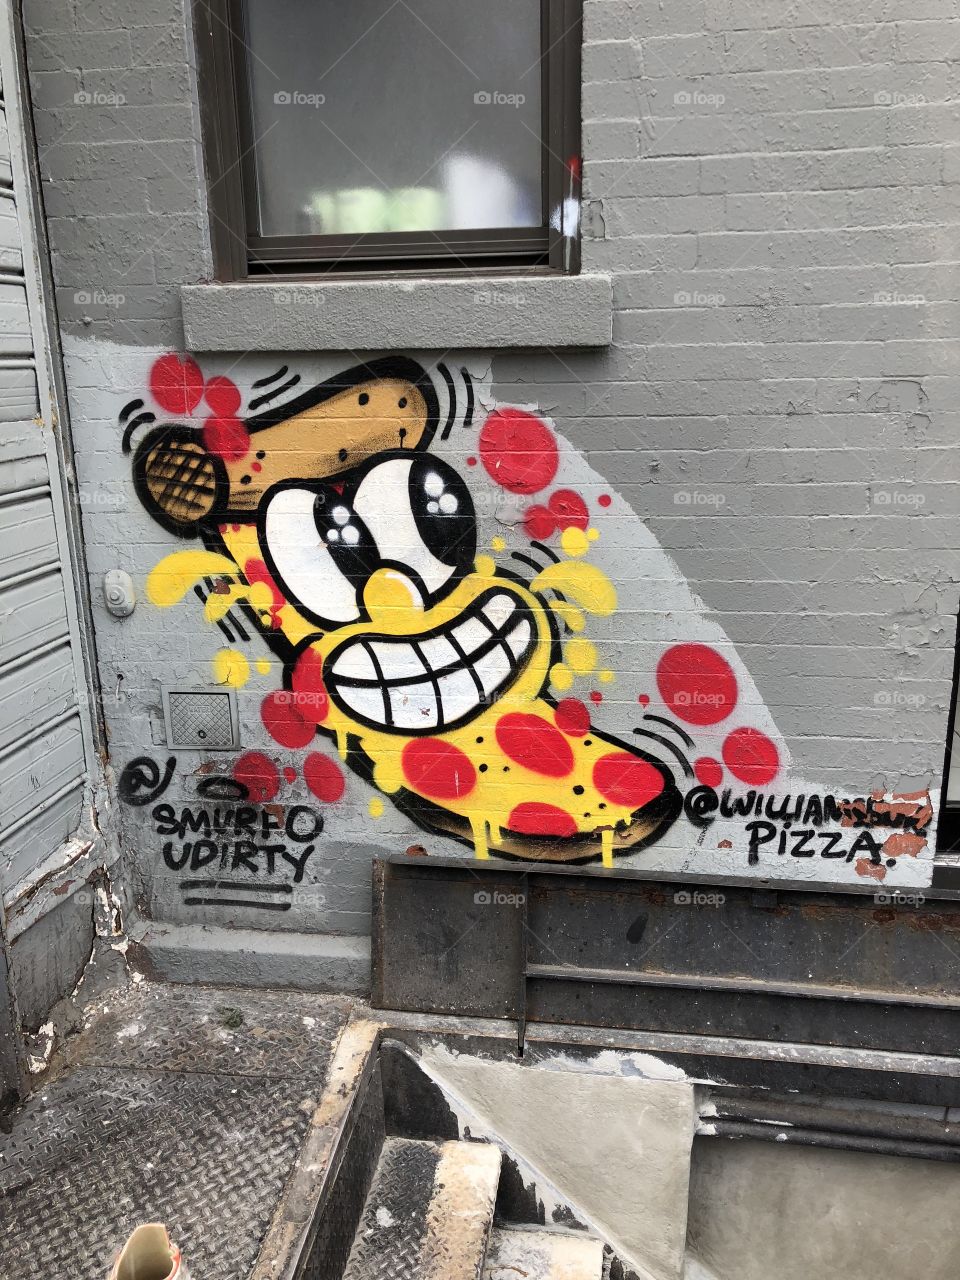 Smiling slice of pizza nyc street art